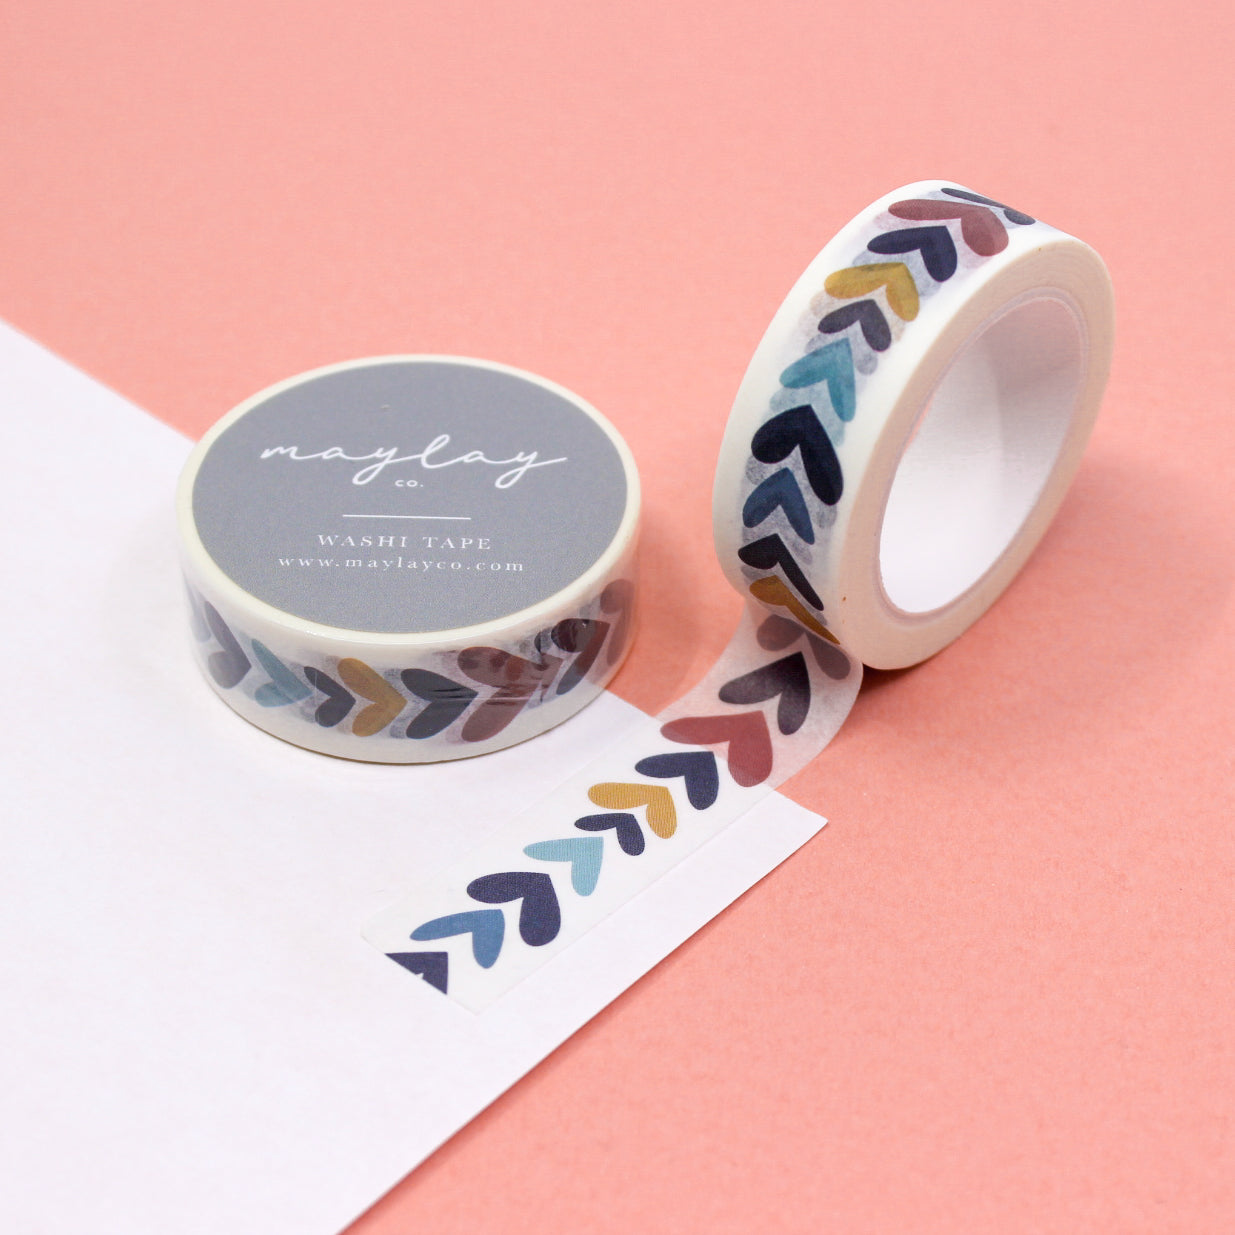 Colorful Hearts Heartwood Washi Tape featuring vibrant, multicolored hearts in a lively pattern, ideal for adding a playful touch to your crafts and designs.. This tape is from Maylay Co. and sold at BBB Supplies Craft Shop.